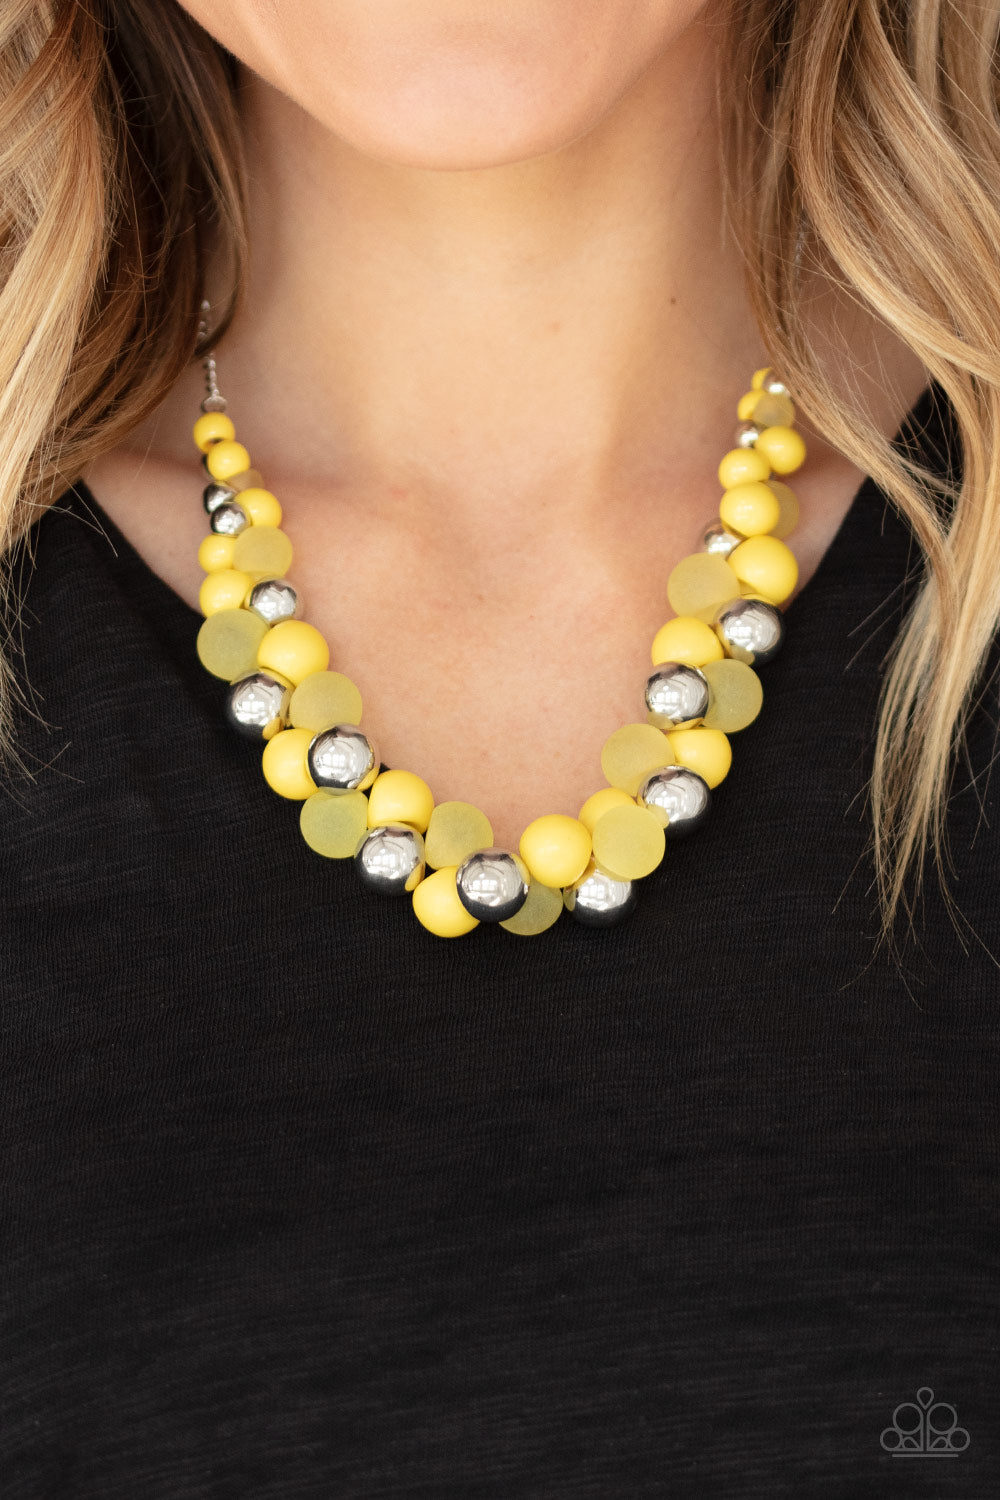 Bubbly Brilliance - Yellow Necklace